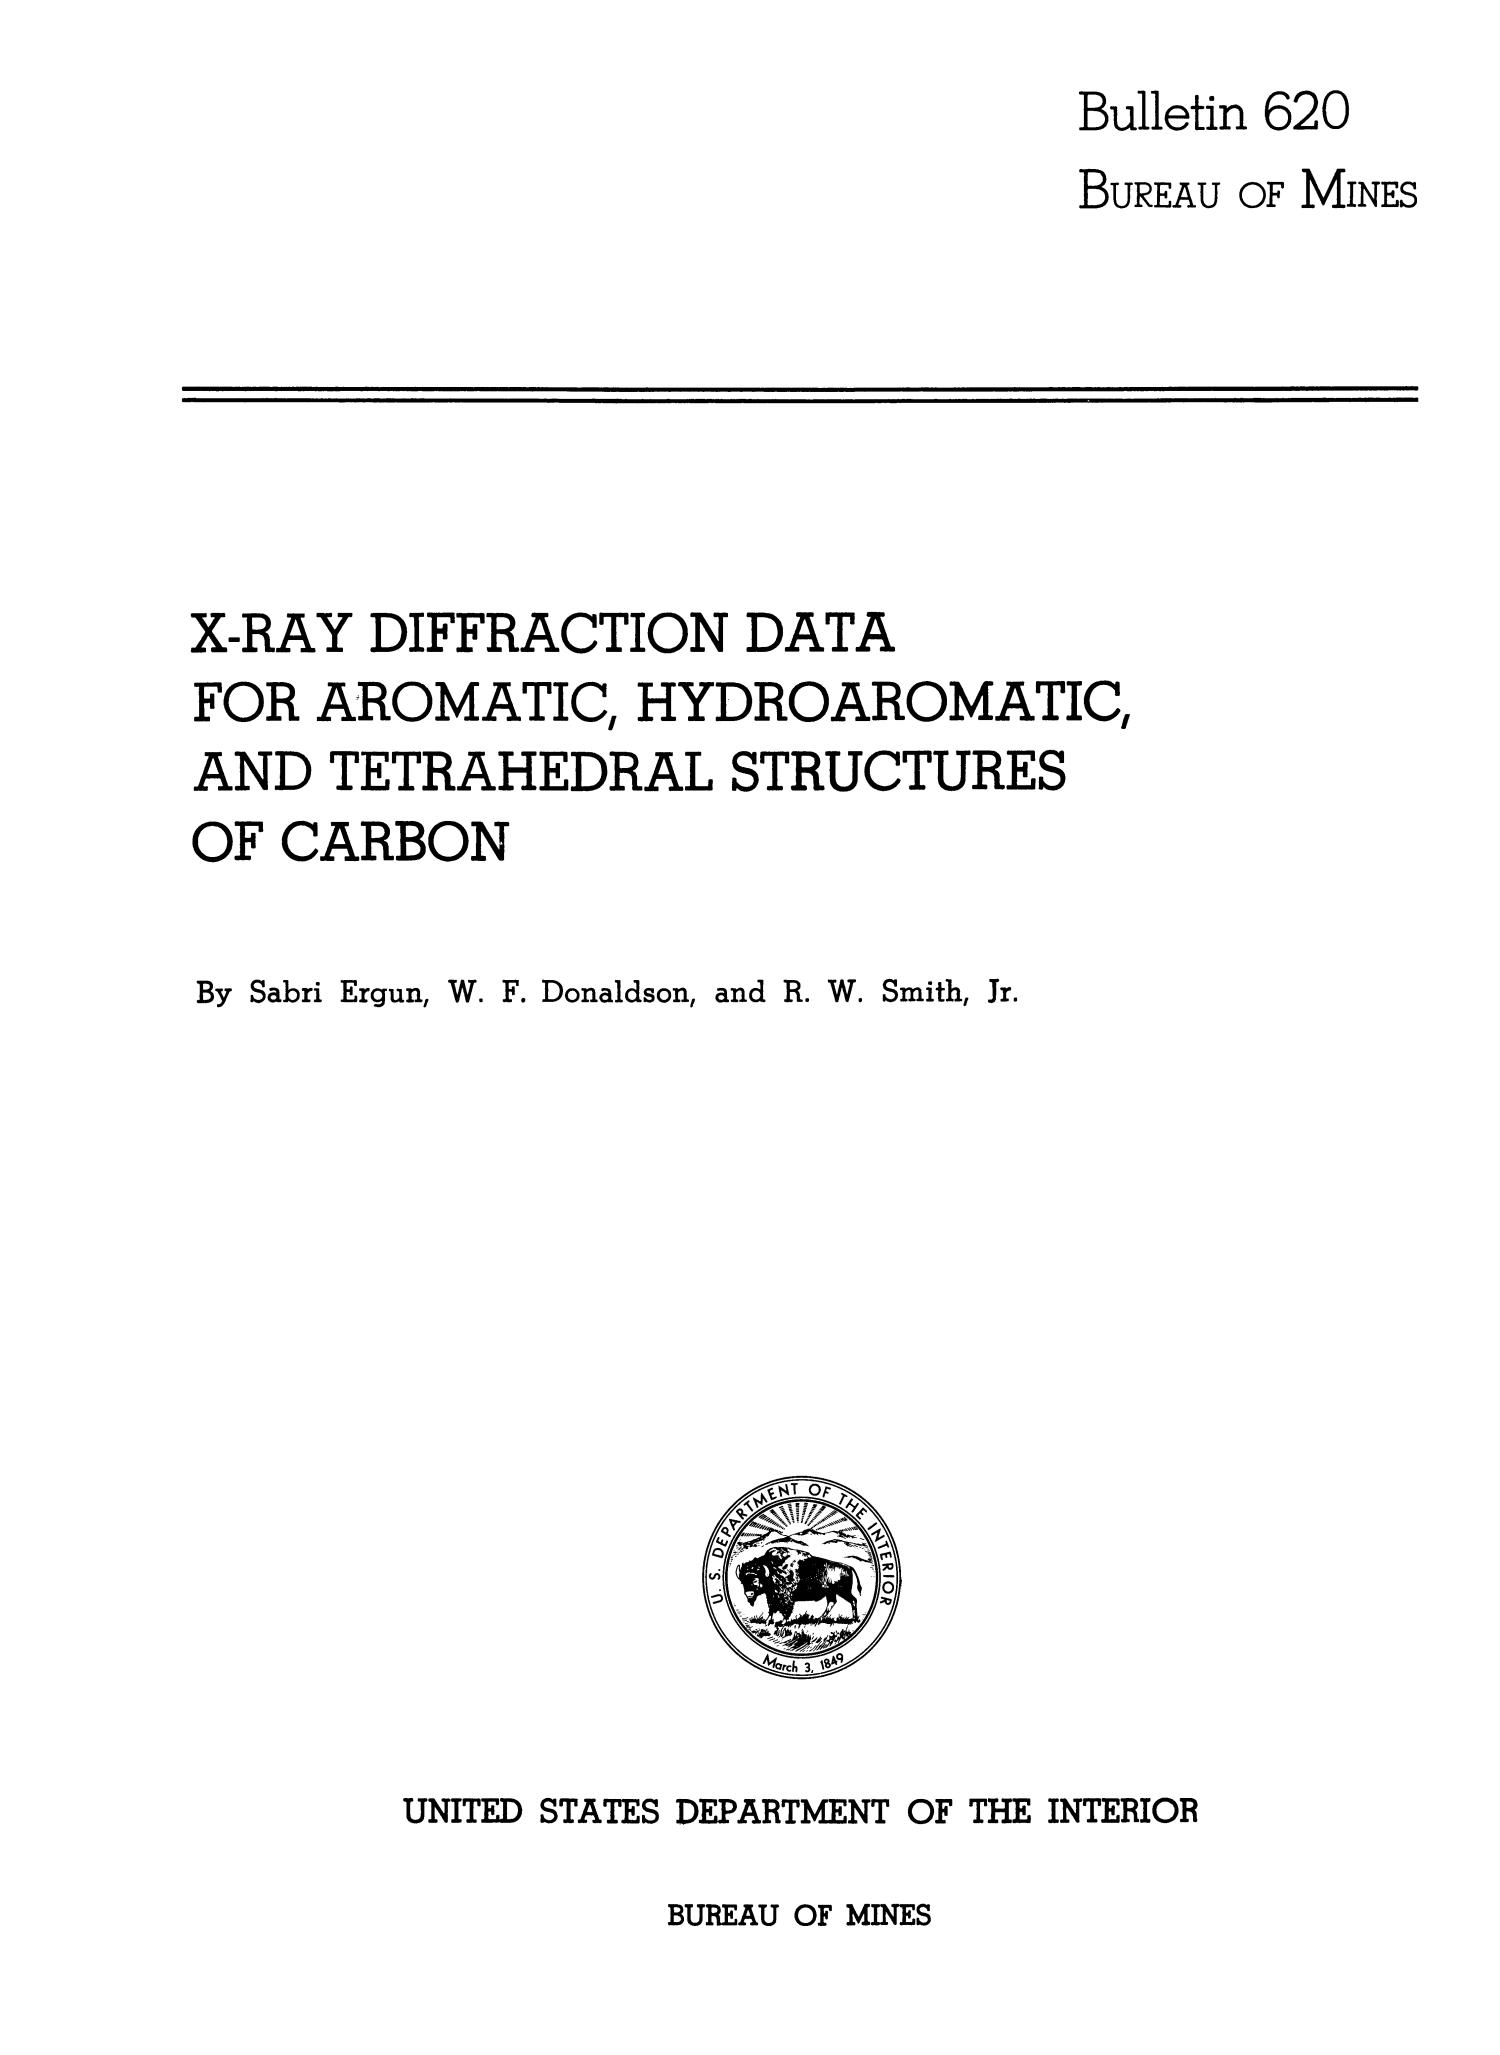 X-Ray Diffraction Data for Aromatic, Hydroaromatic, and Tetrahedral Structures of Carbon
                                                
                                                    I
                                                